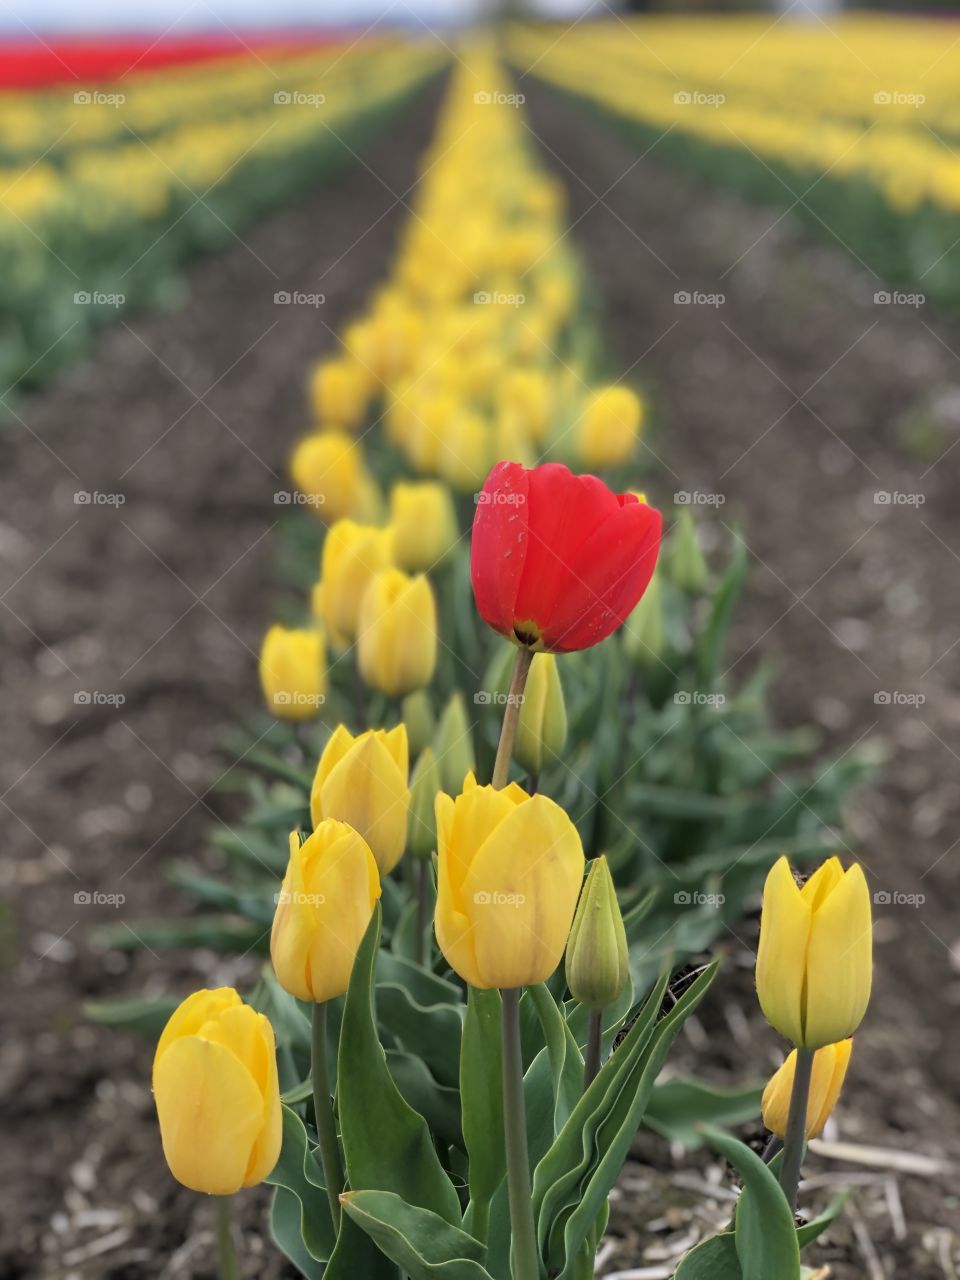 Mount Vernon Flower Fields Vibrant Red Tulip in Row of Yellow Tulips